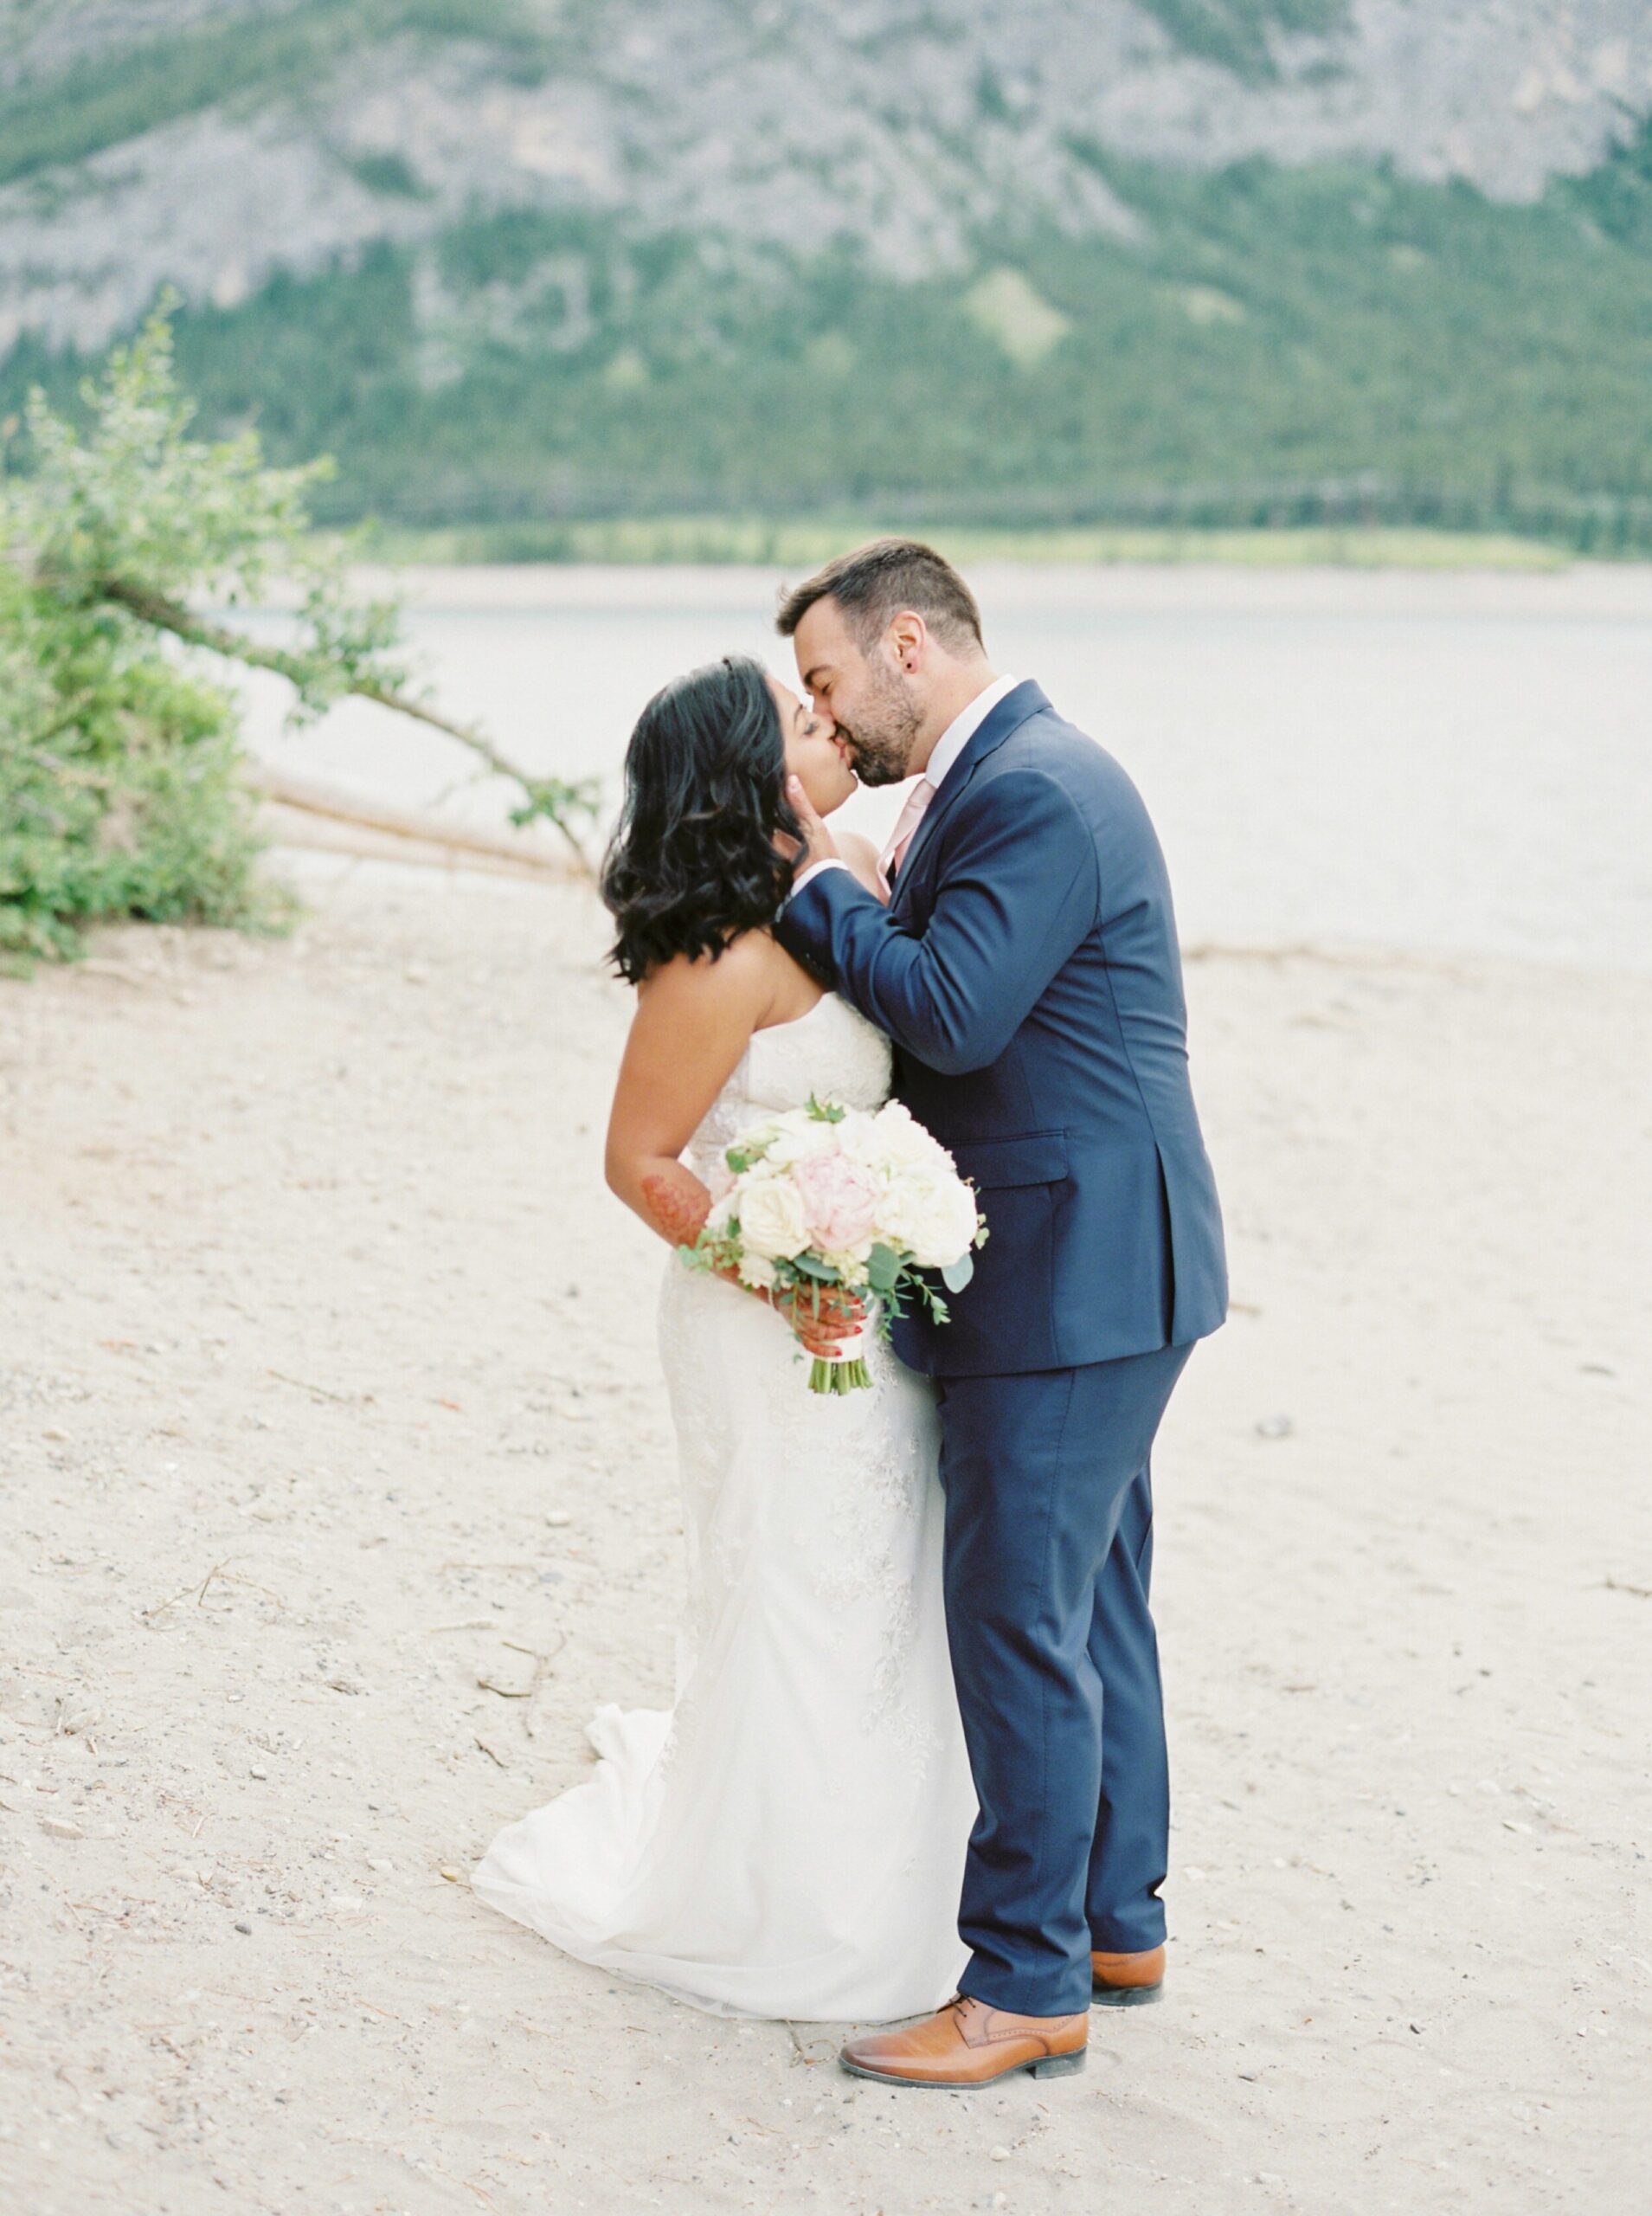  mini ceremony brides and groom navy suit and minimal form fitting dress | Kananaskis micro wedding elopement in the mountains 